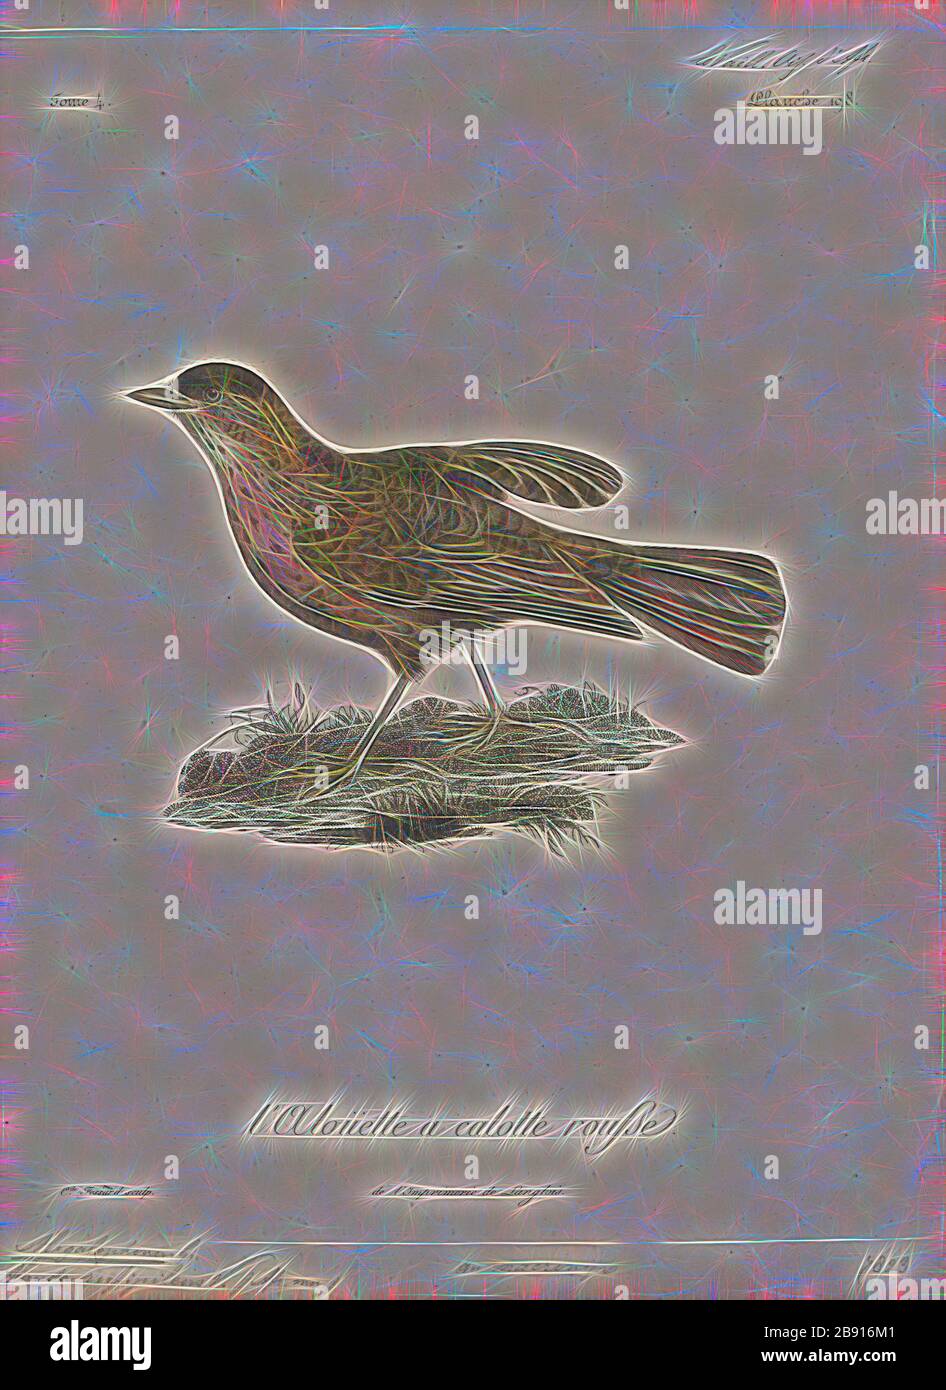 Megalophonus rufipileus, Print, Mirafra, Mirafra is a genus of lark in the Alaudidae family. Some Mirafra species are called larks, Reimagined by Gibon, design of warm cheerful glowing of brightness and light rays radiance. Classic art reinvented with a modern twist. Photography inspired by futurism, embracing dynamic energy of modern technology, movement, speed and revolutionize culture. Stock Photo